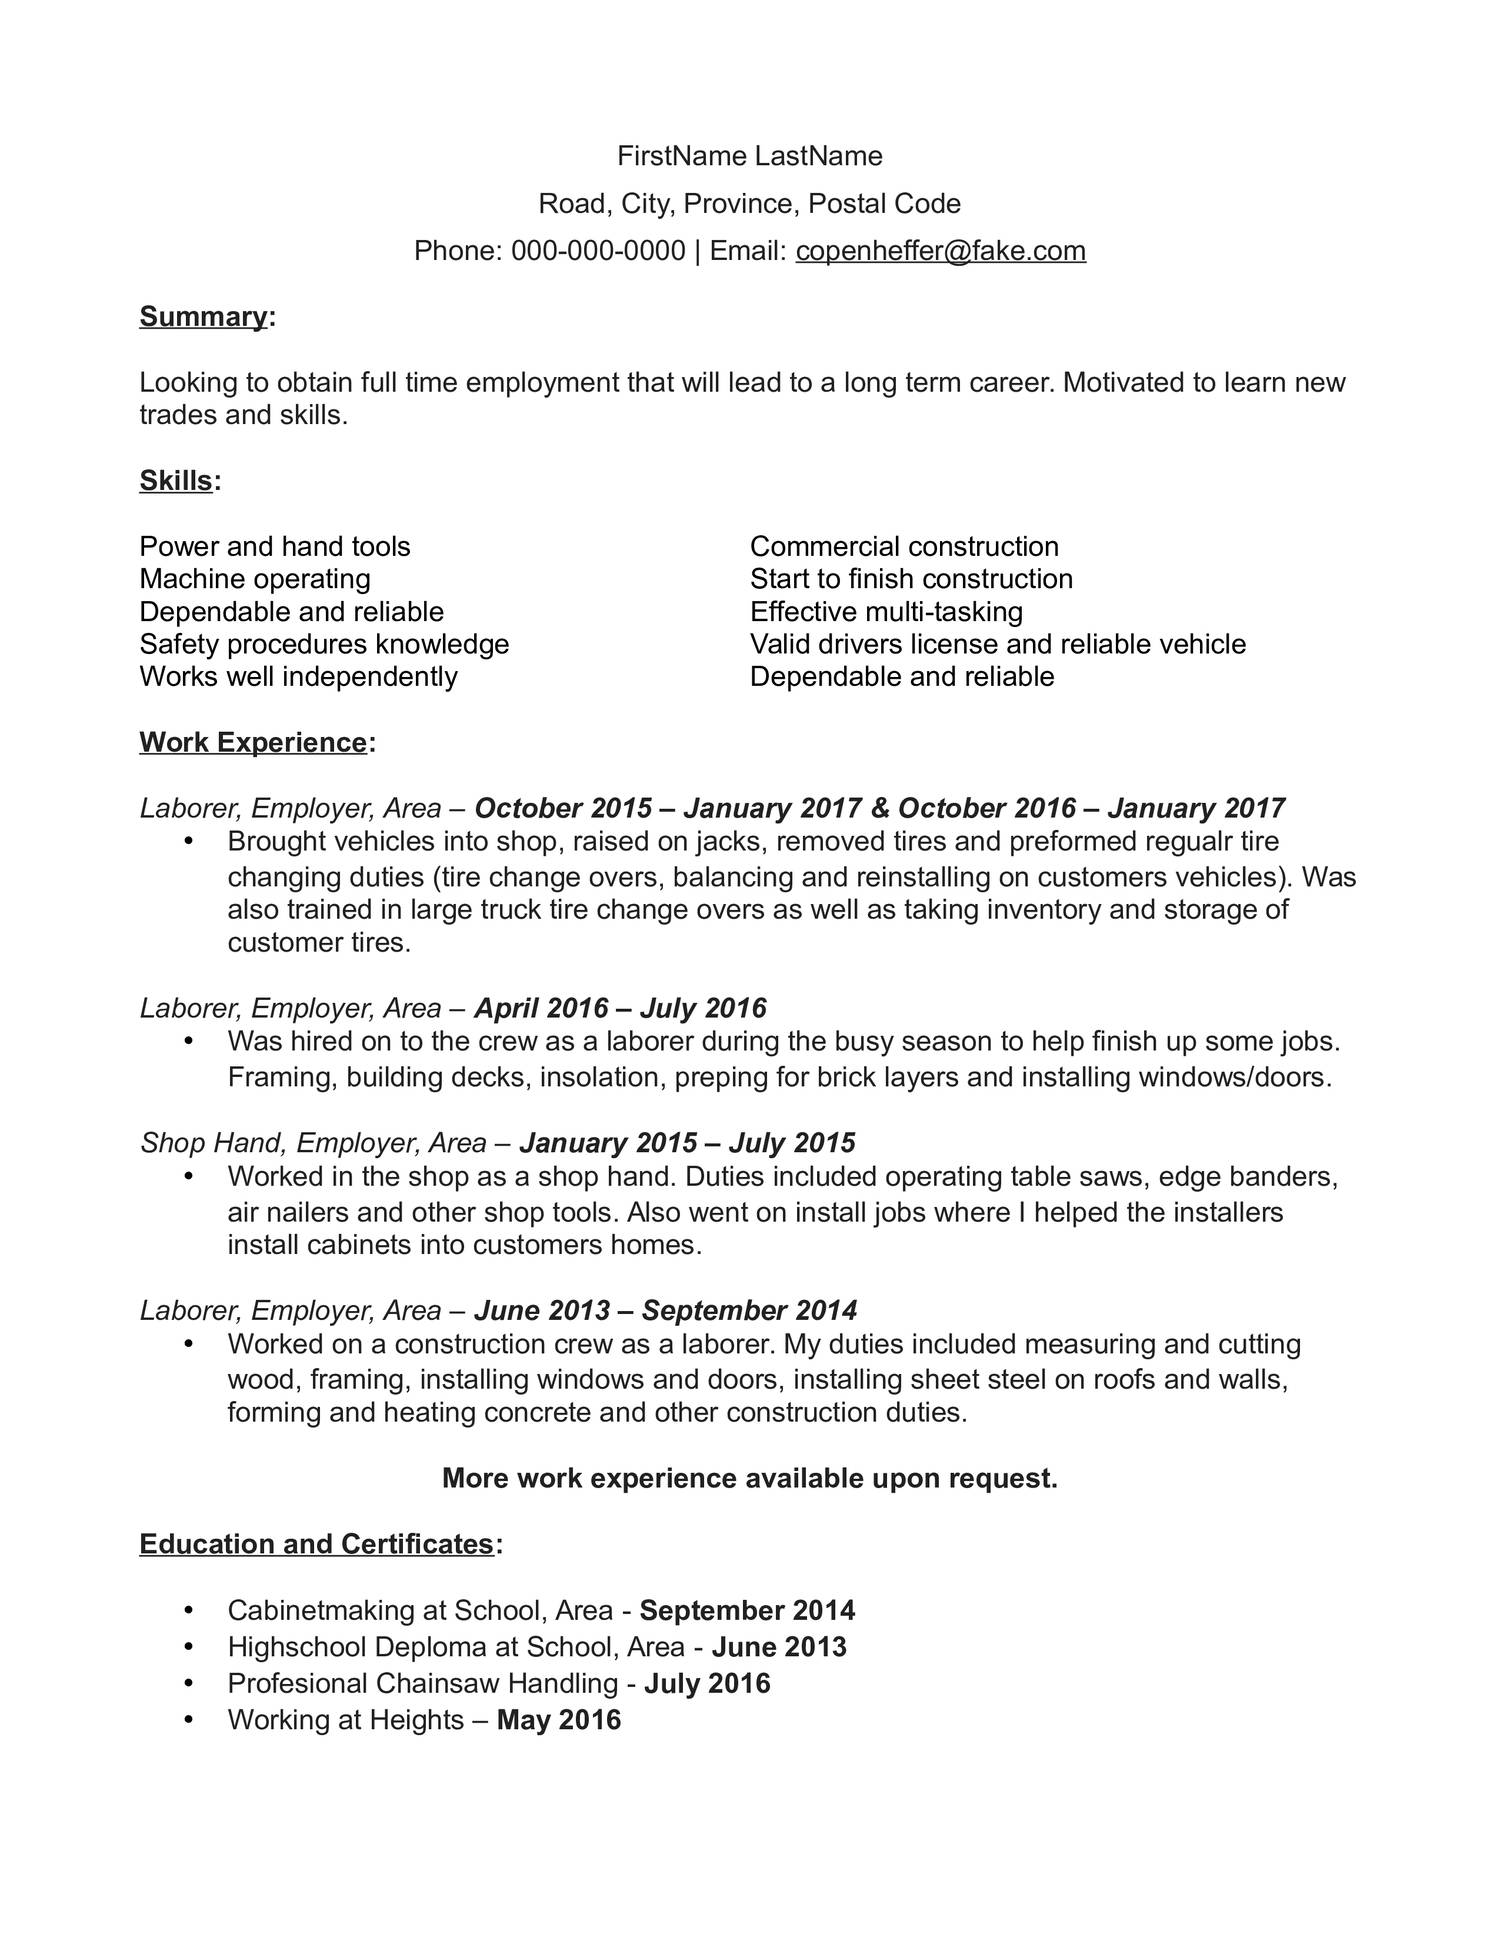 McIsaac Resume.odt | DocDroid